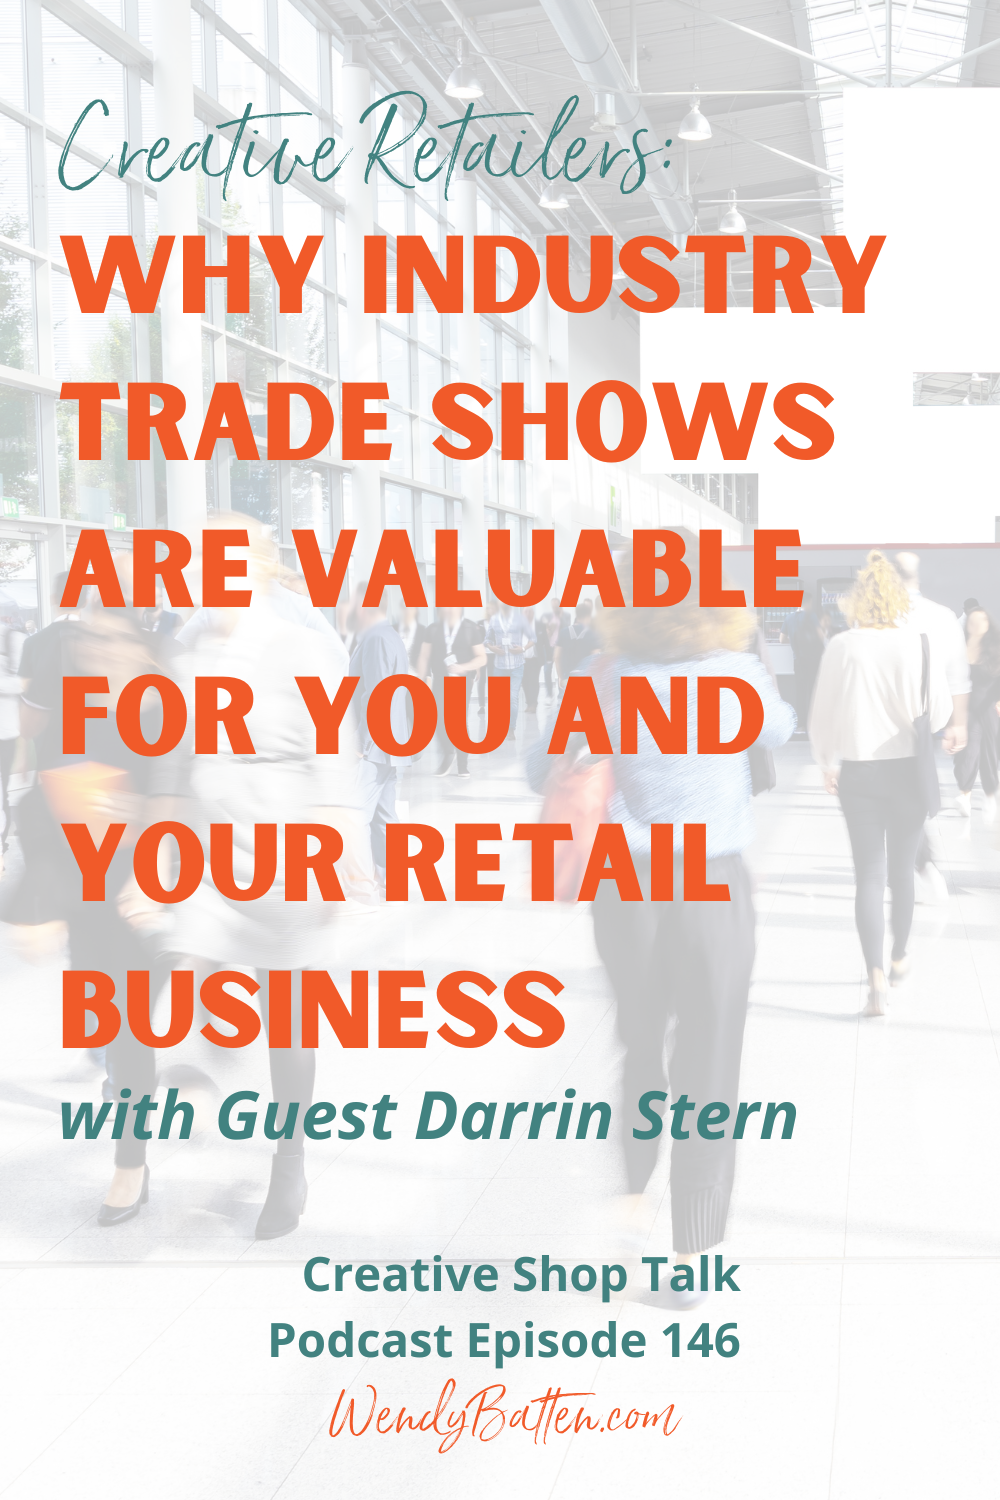 Wendy Batten - Creative Shop Talk Podcast - Why Industry Trade Shows are Valuable for You and Your Retail Business with Darrin Stern